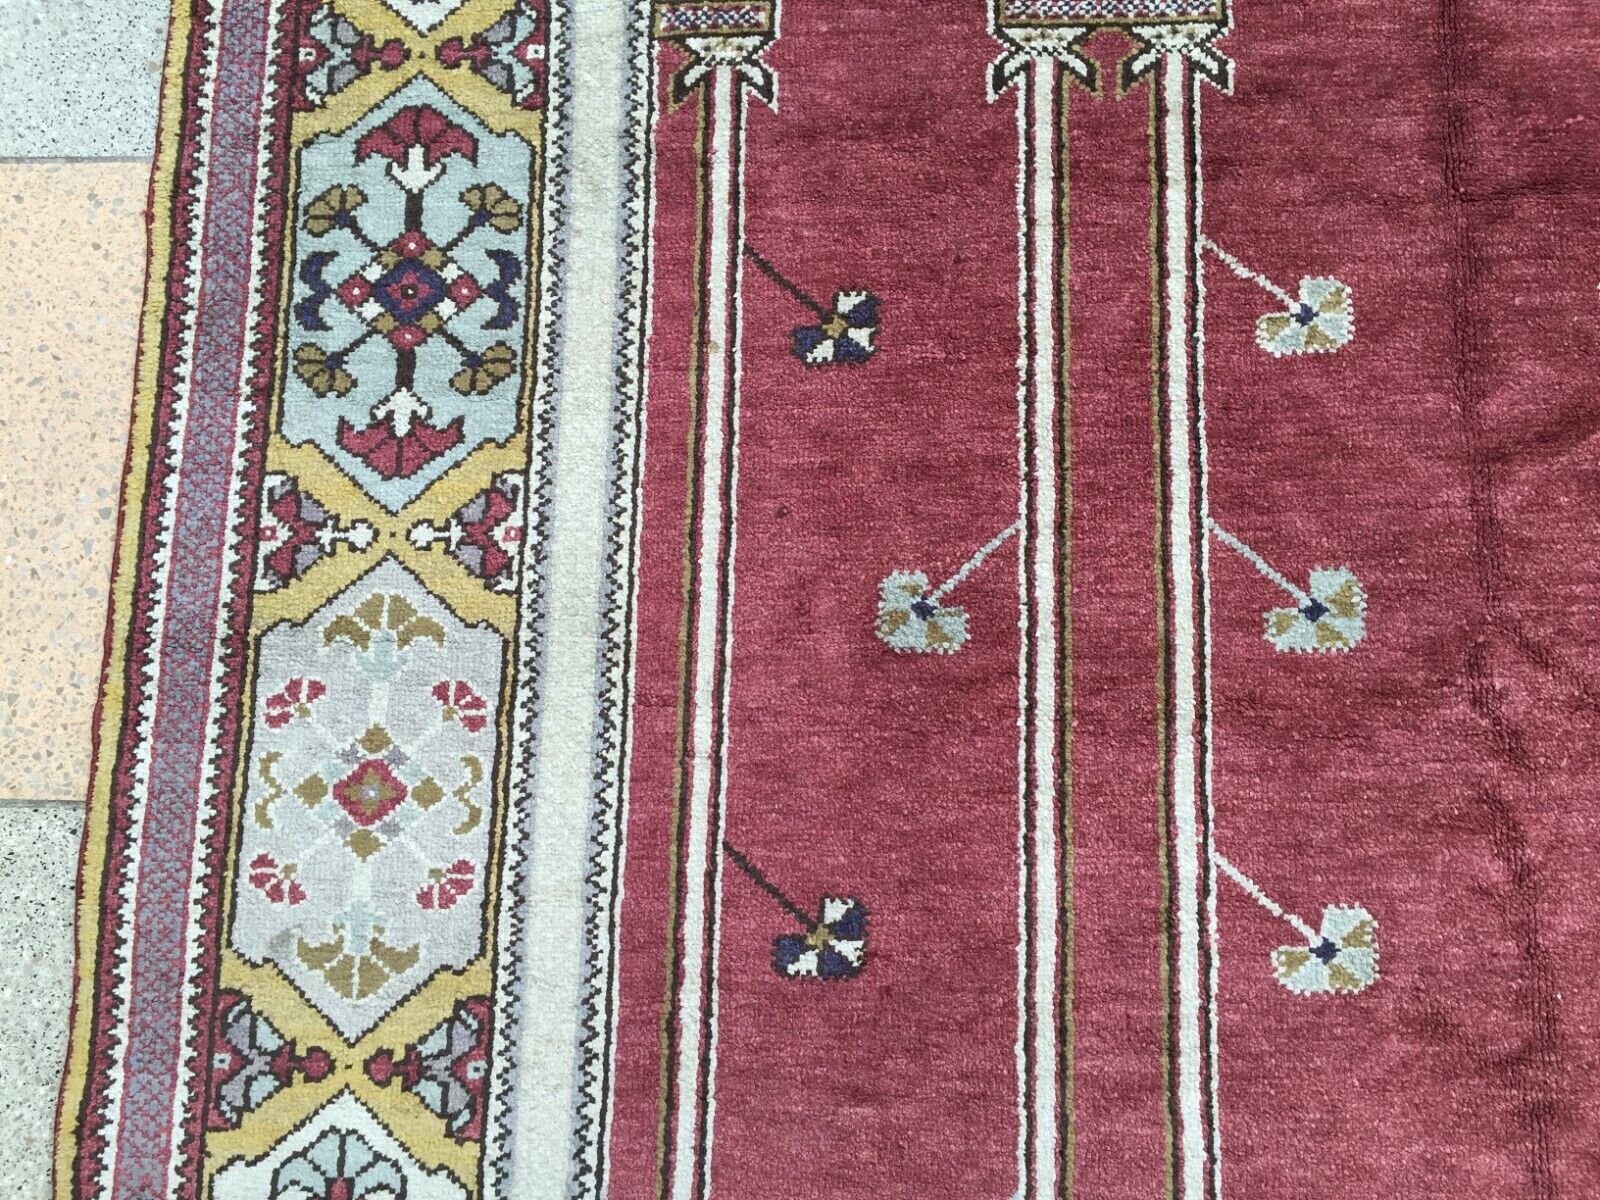 Side angle view of the rug, emphasizing its high-quality wool material and excellent vintage condition